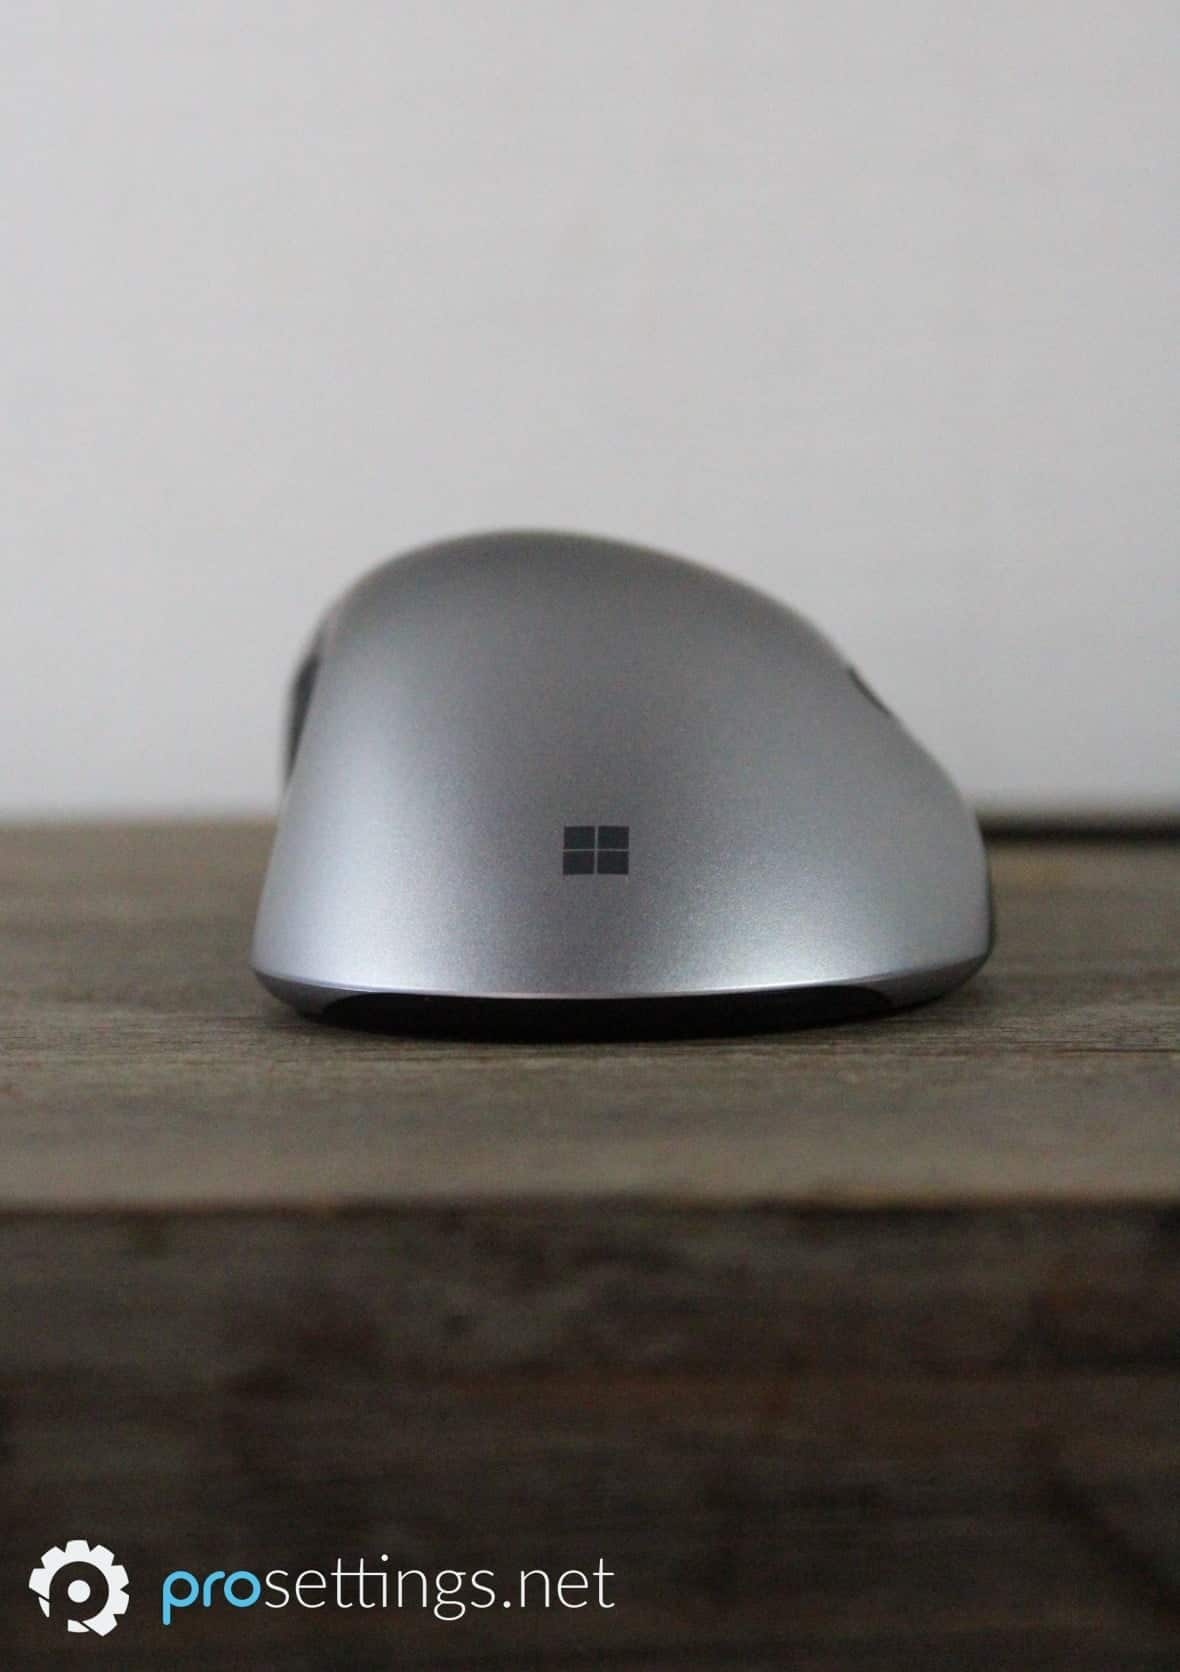 Microsoft Intellimouse Pro Review Back